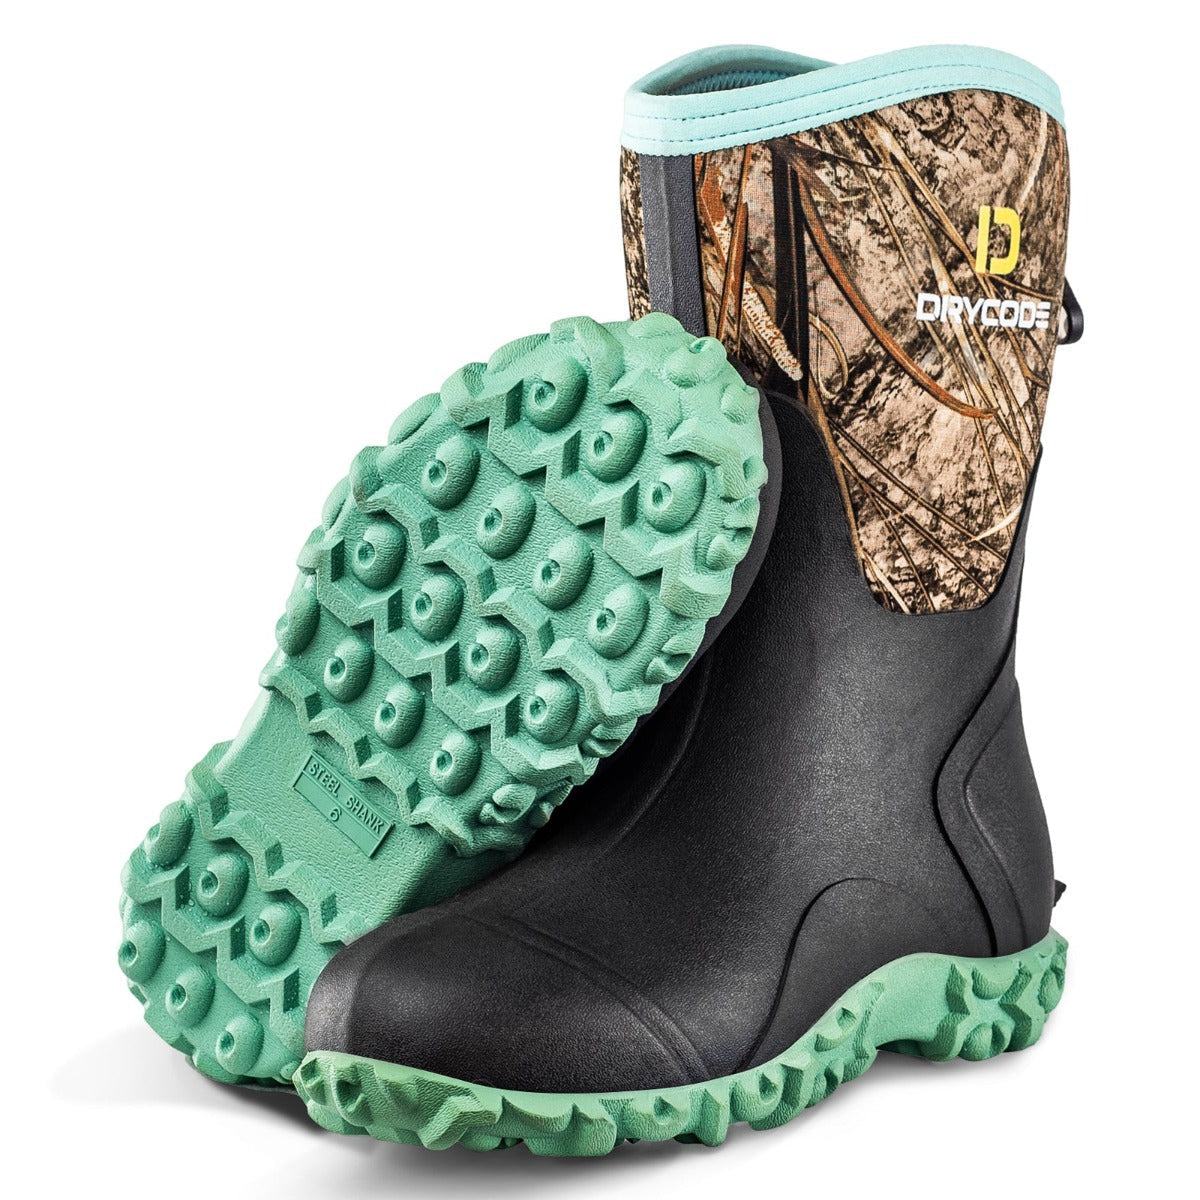 Rubber Rain Boots (Green) for Women with Steel Shank, 5mm Neoprene Camo Boots